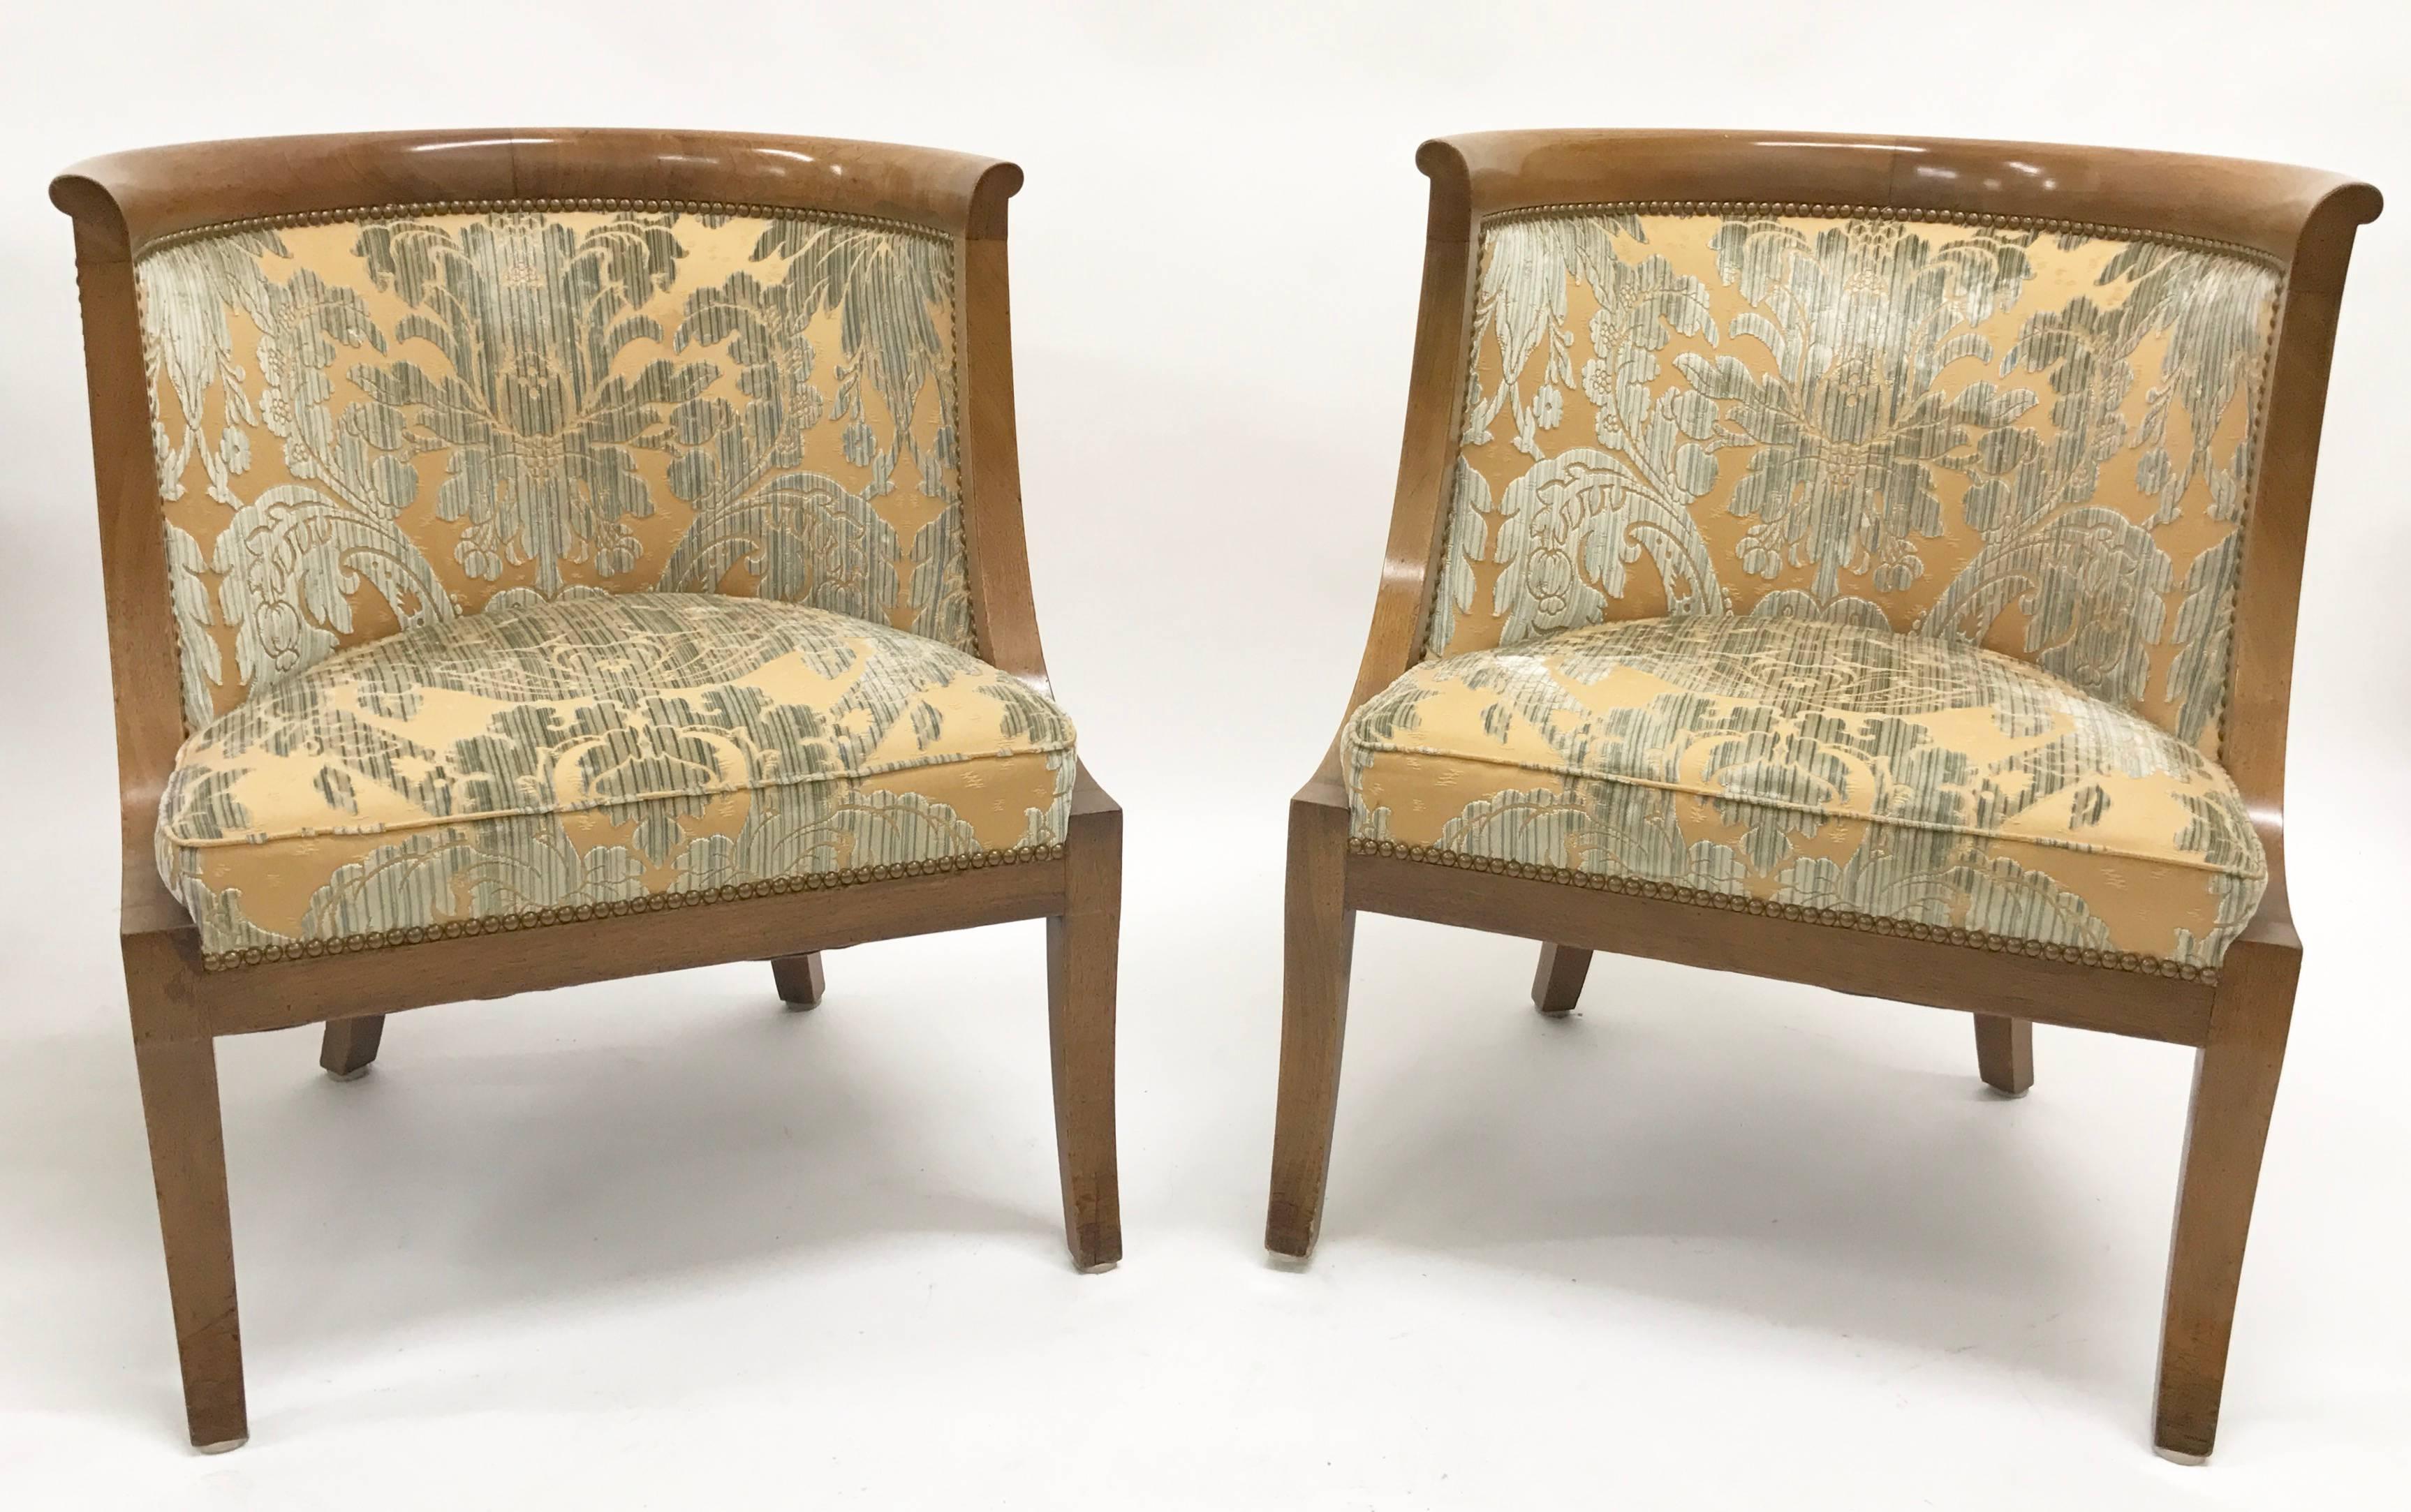 Pair of Biedermeier barrel-back tub chairs with ornate upholstery. These are a 1960s version of 19th century chairs.